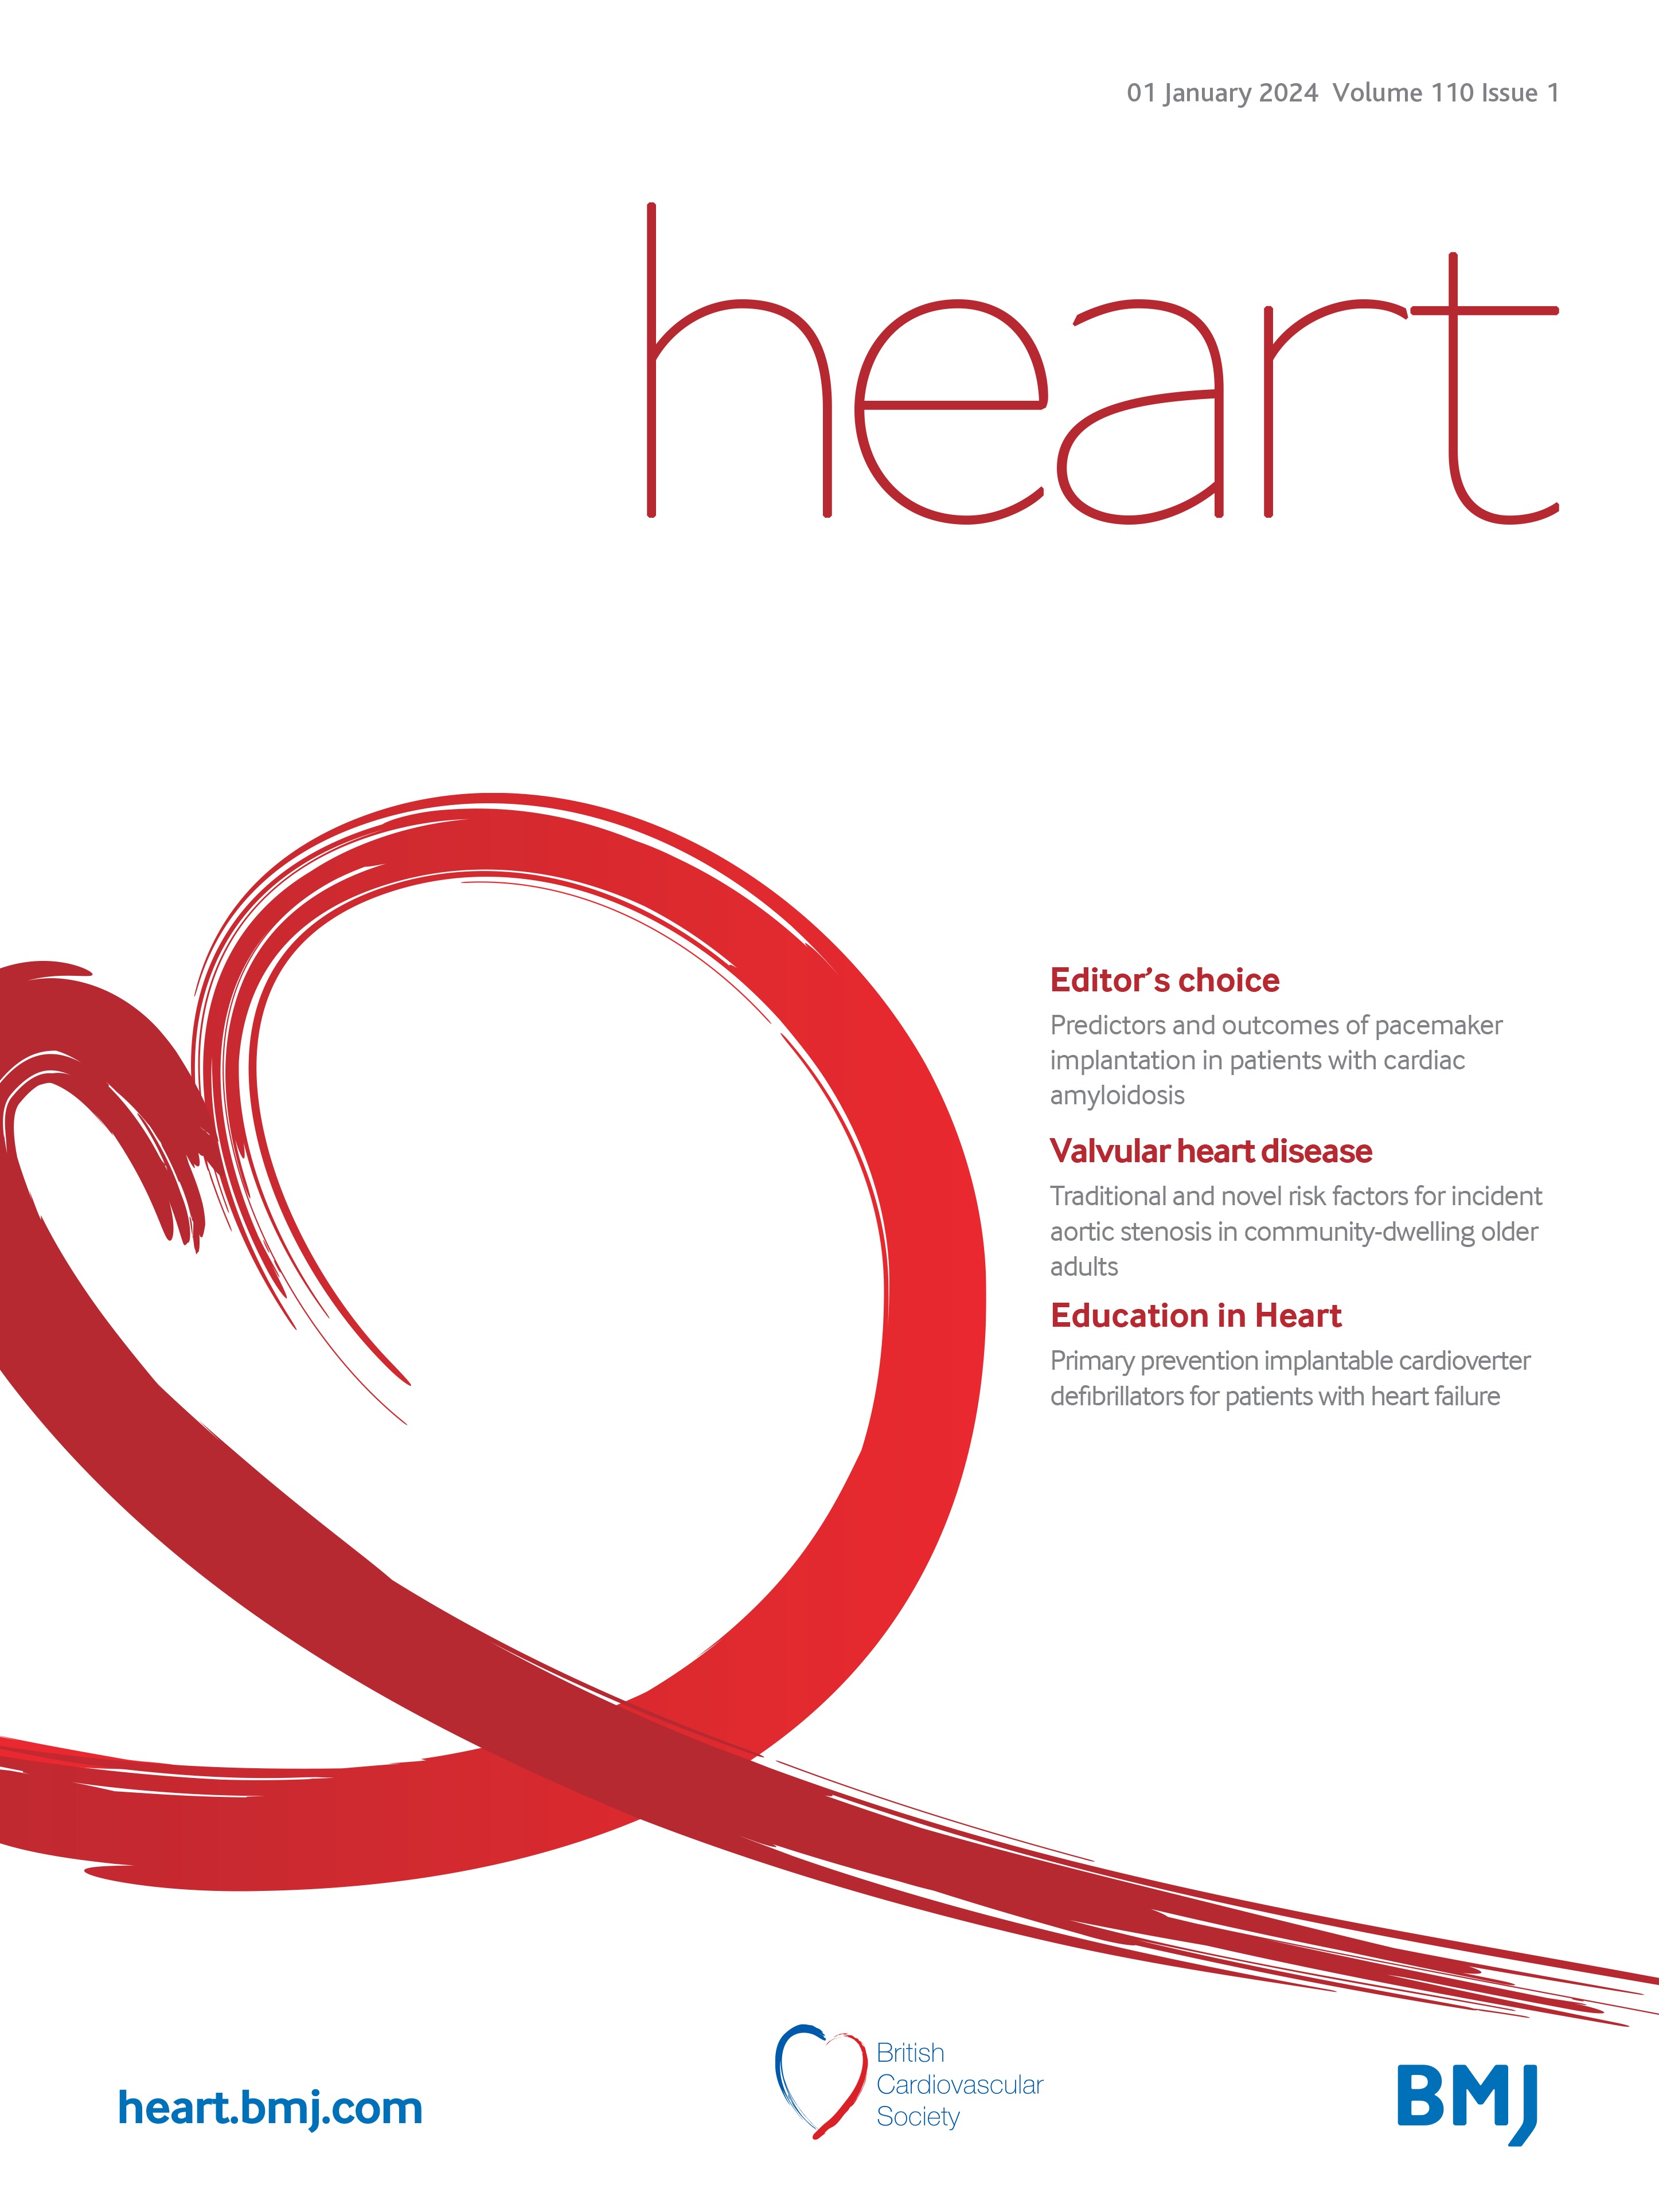 Primary prevention implantable cardioverter defibrillators for patients with heart failure